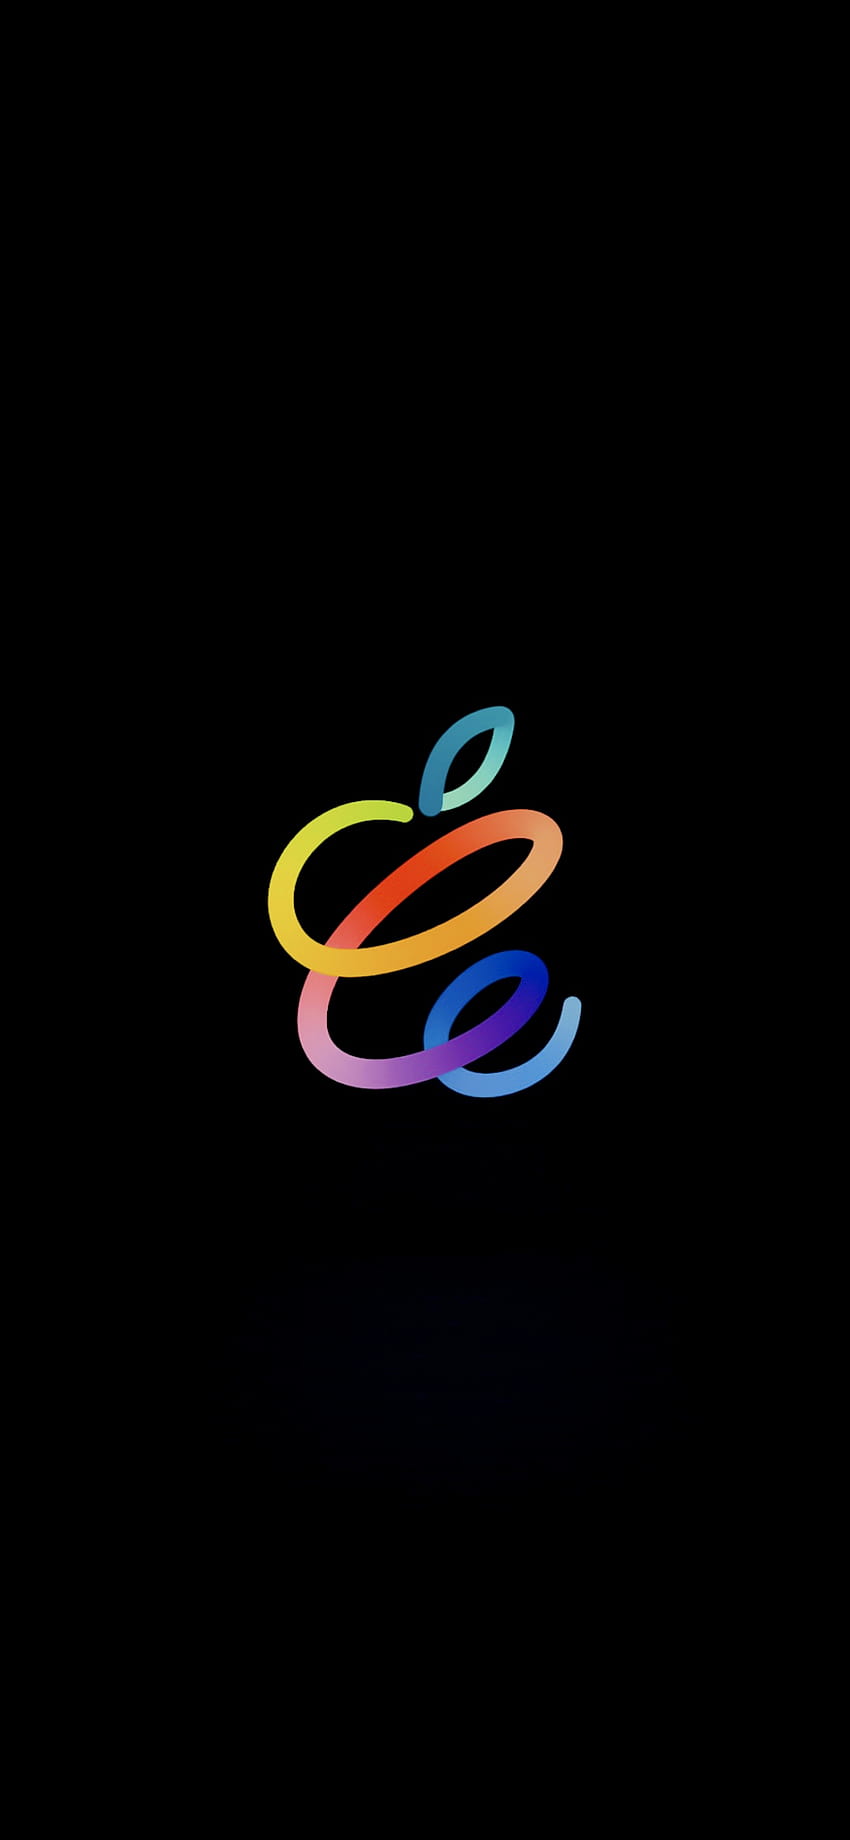 Apple 'Spring Loaded' event, apple hello HD phone wallpaper